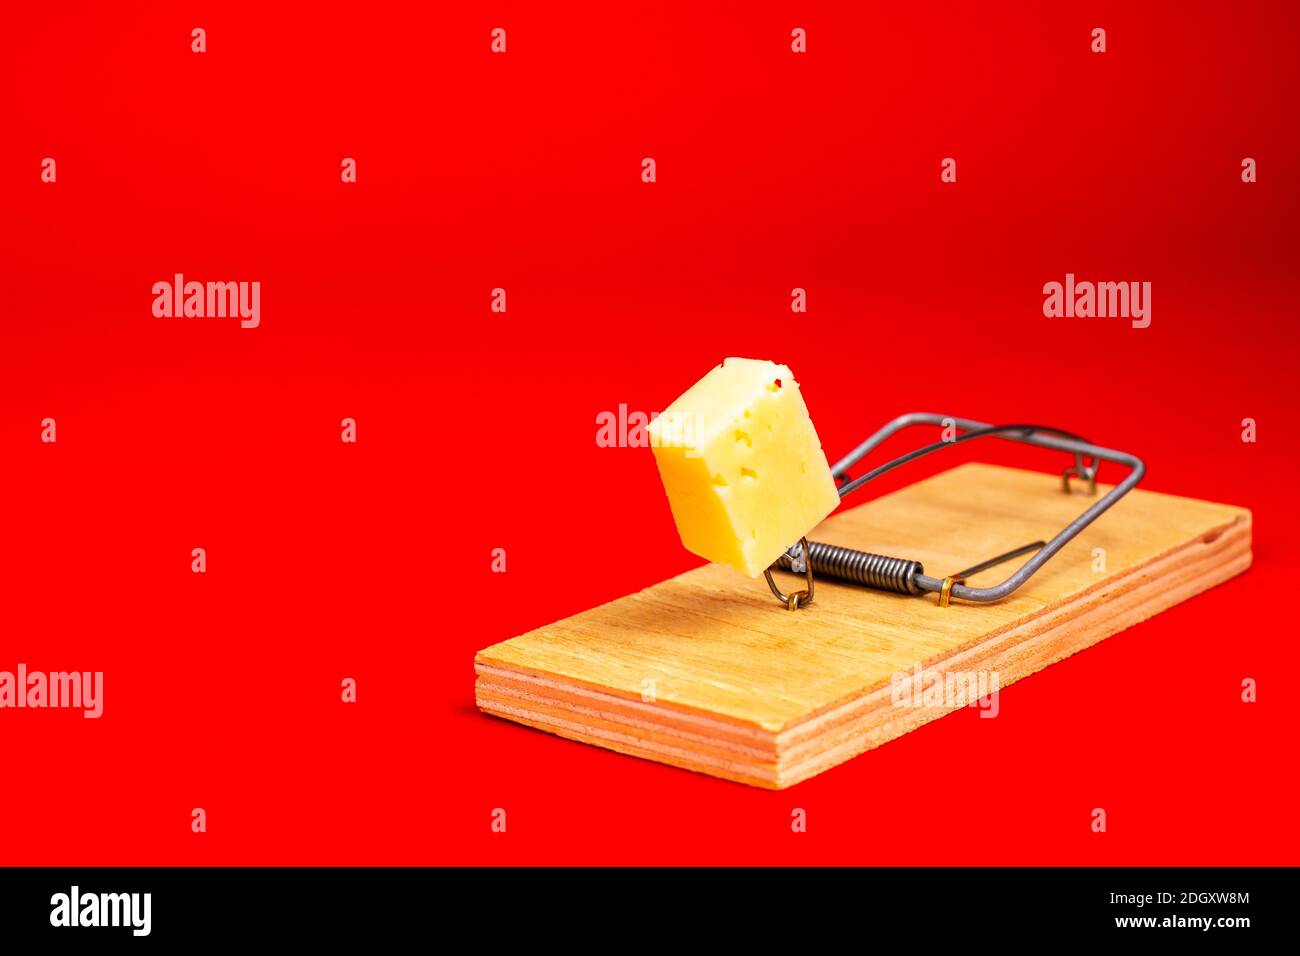 Mouse bait. A piece of cheese in a mousetrap. Red background. Stock Photo